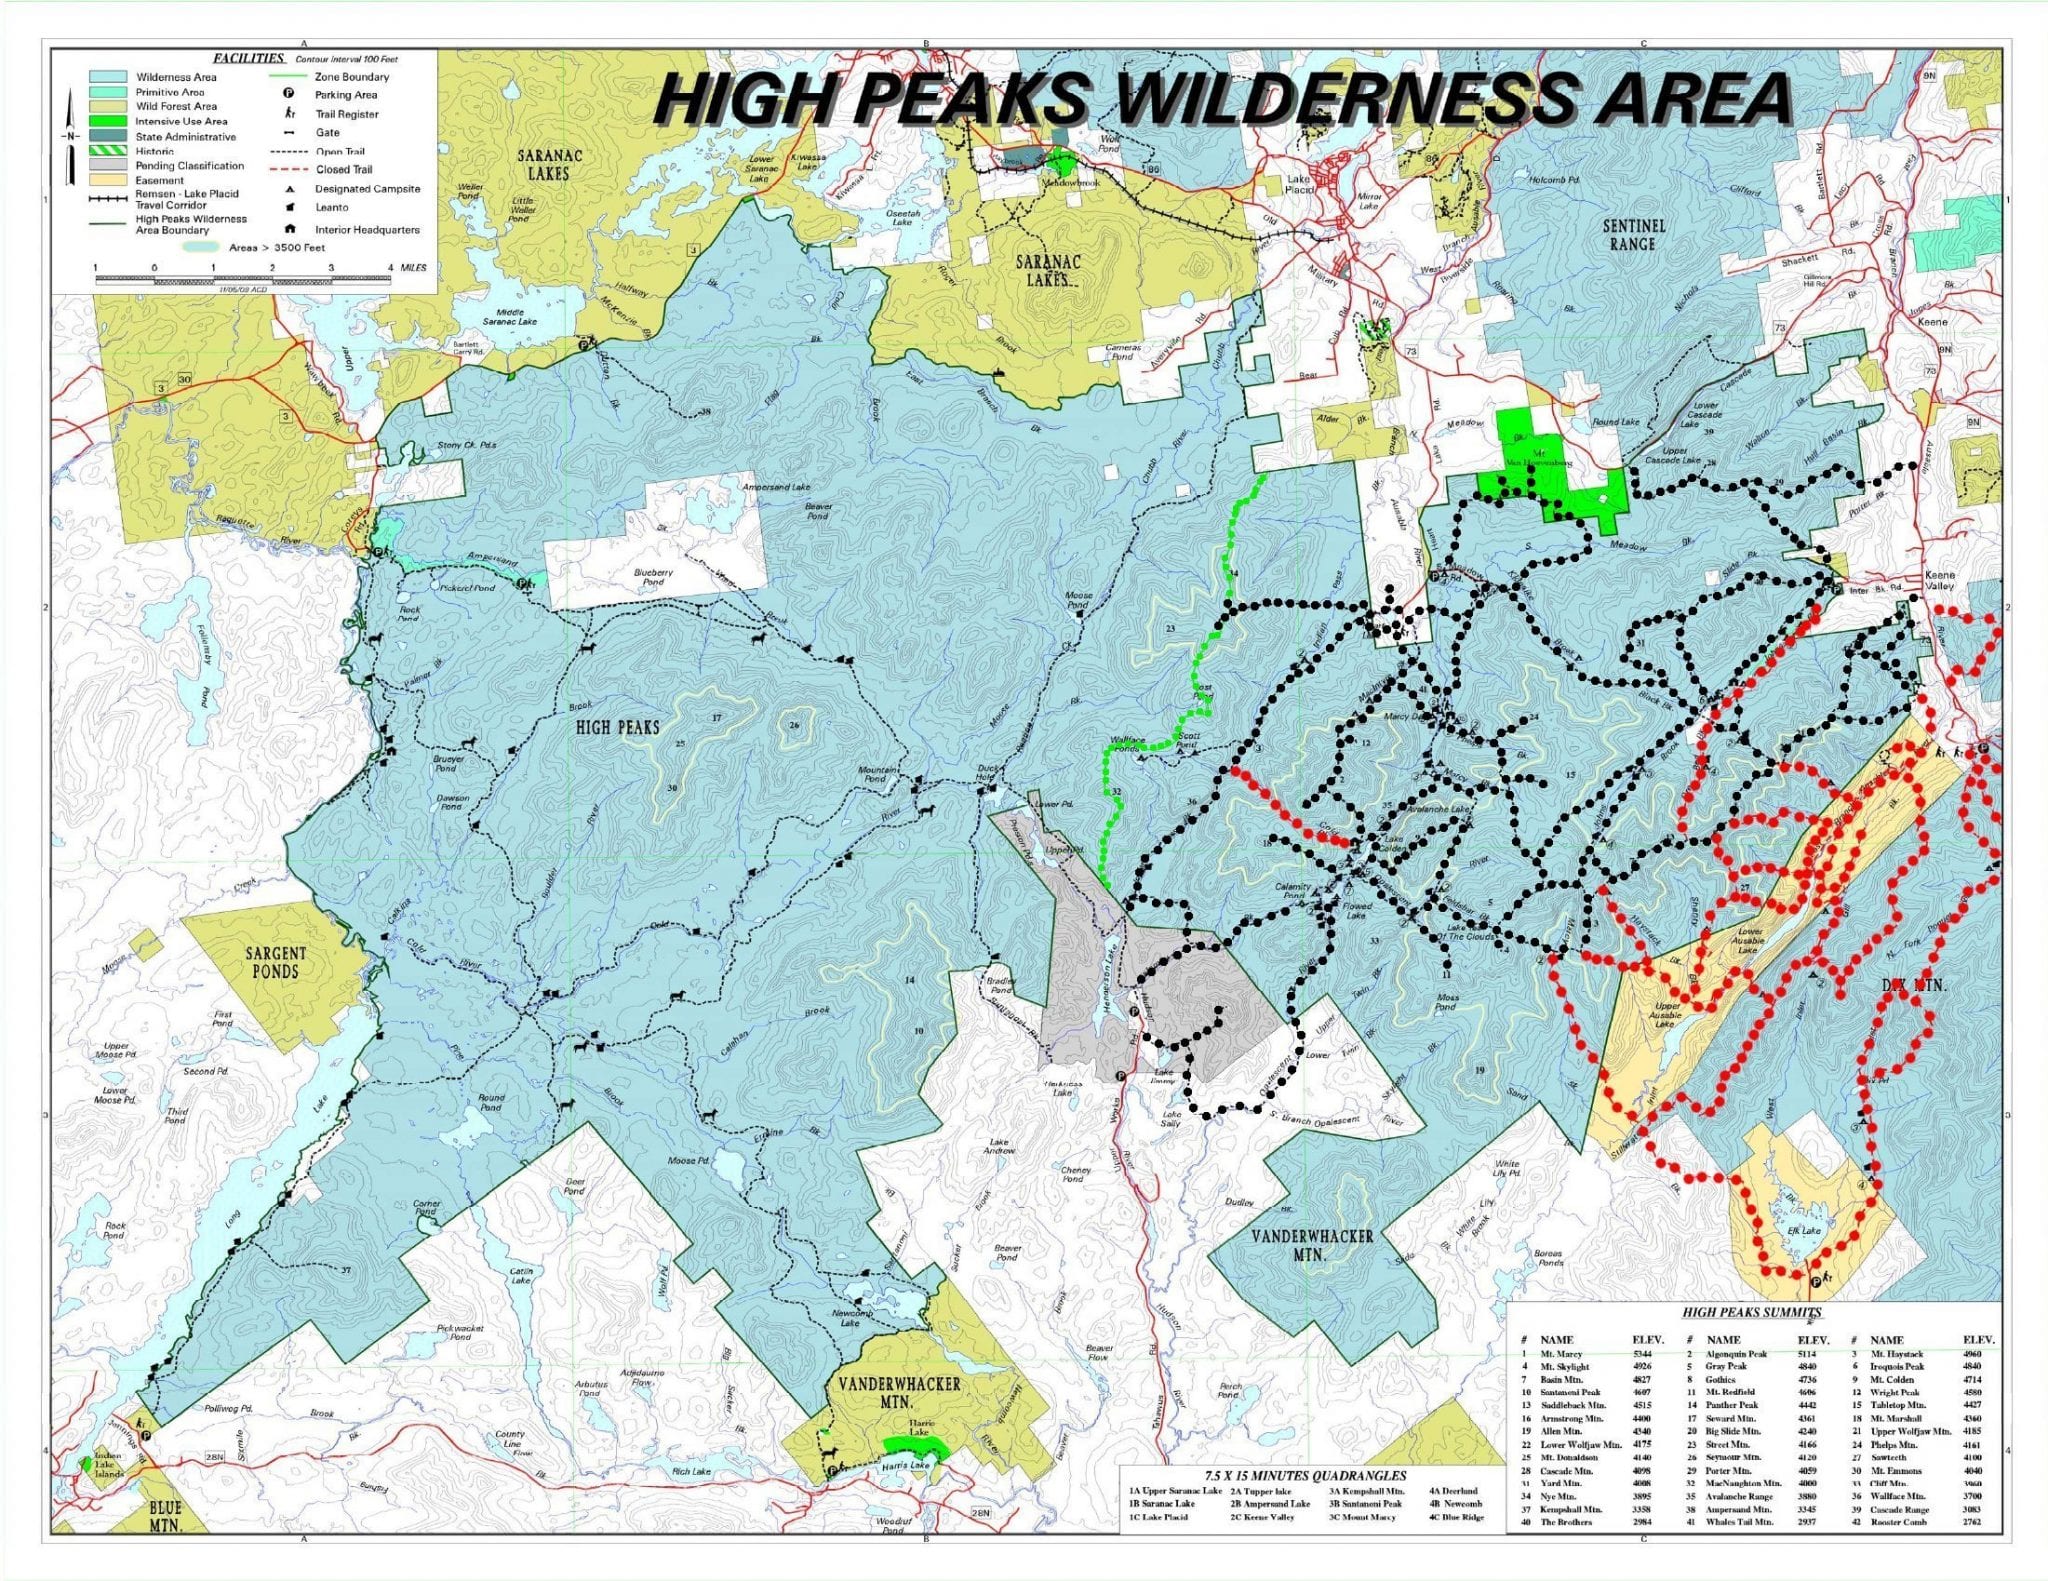 High Peaks trails are open, but be careful - Adirondack Explorer